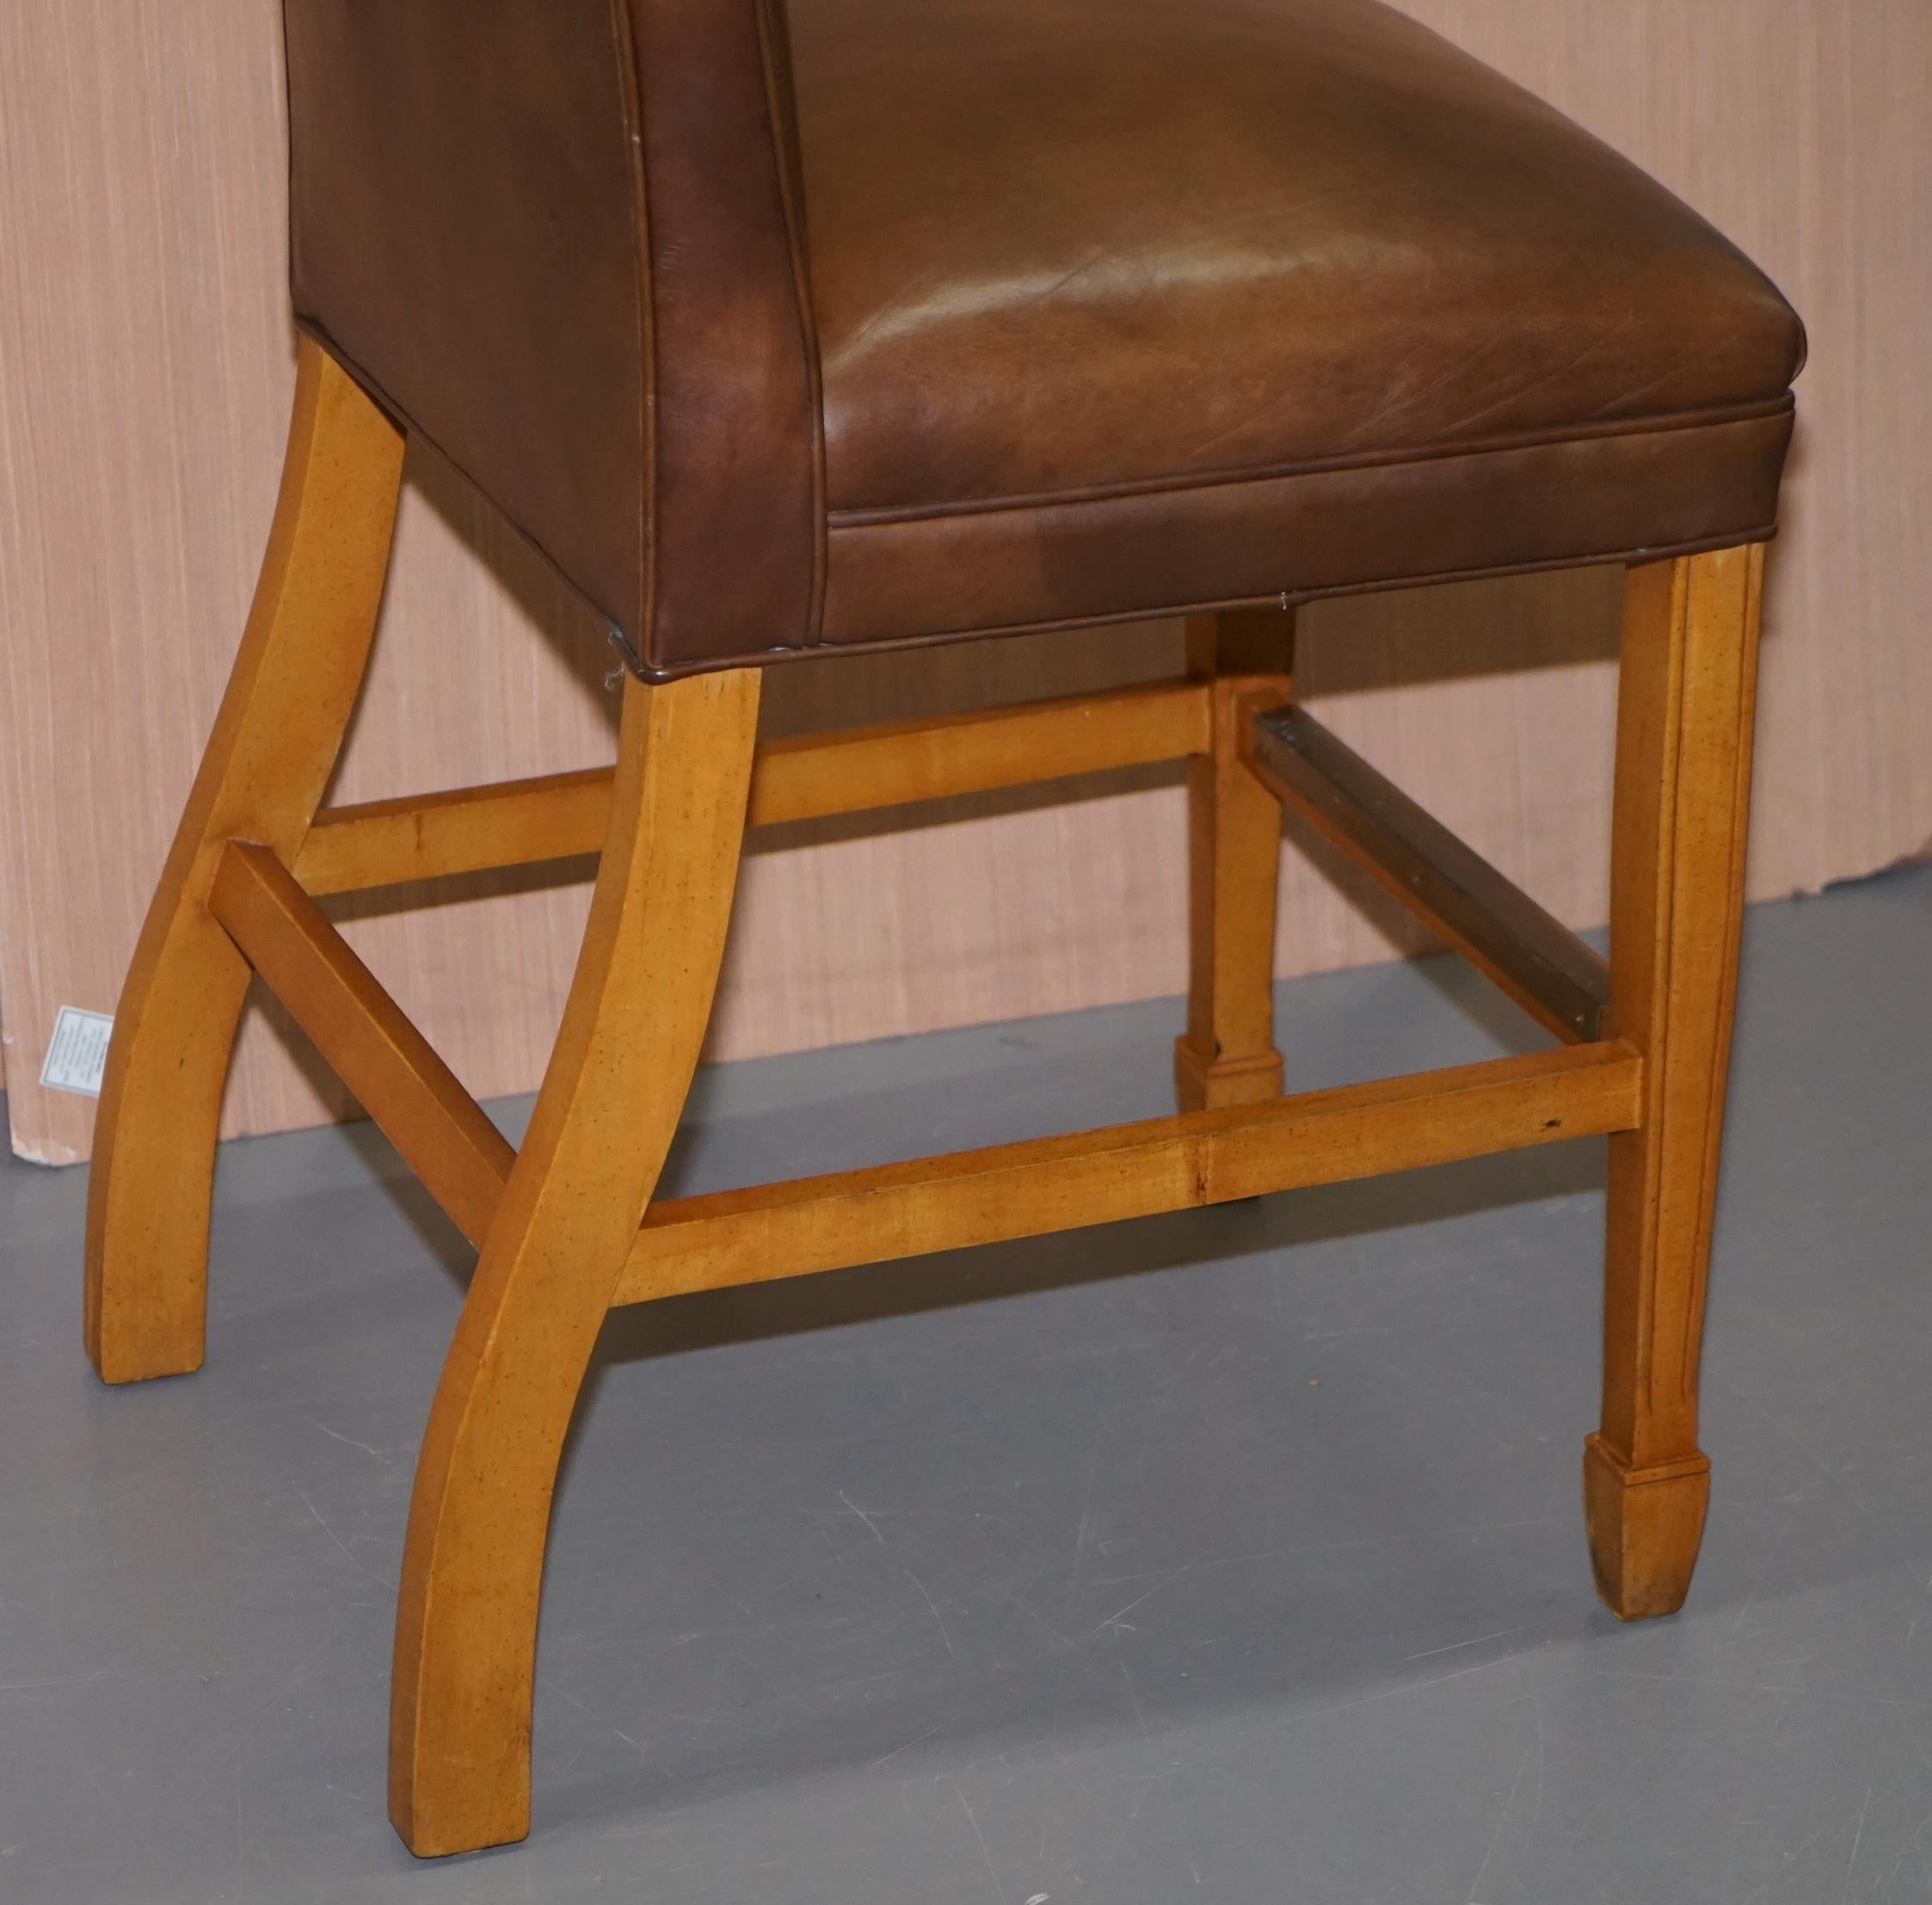 1 of 6 Hand Dyed Brown Leather MALONE & Hancock High Bar Stools Hardwood Framed 6